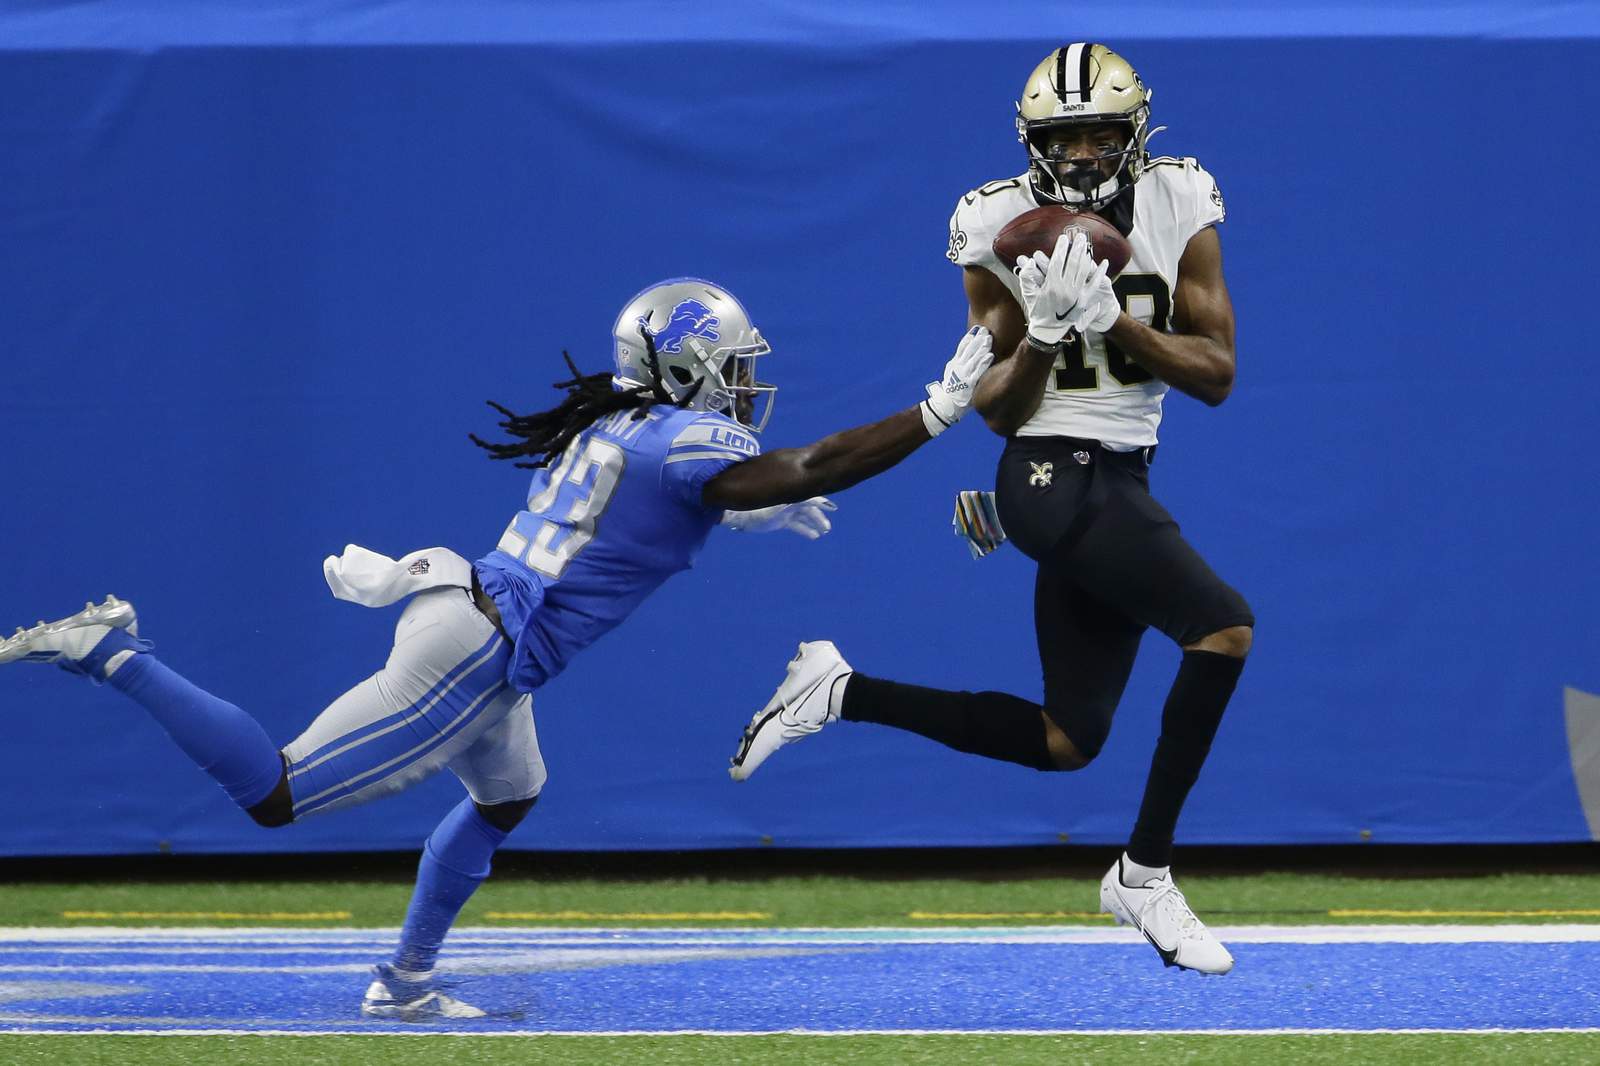 Saints score 5 straight TDs in 35-29 win over Lions